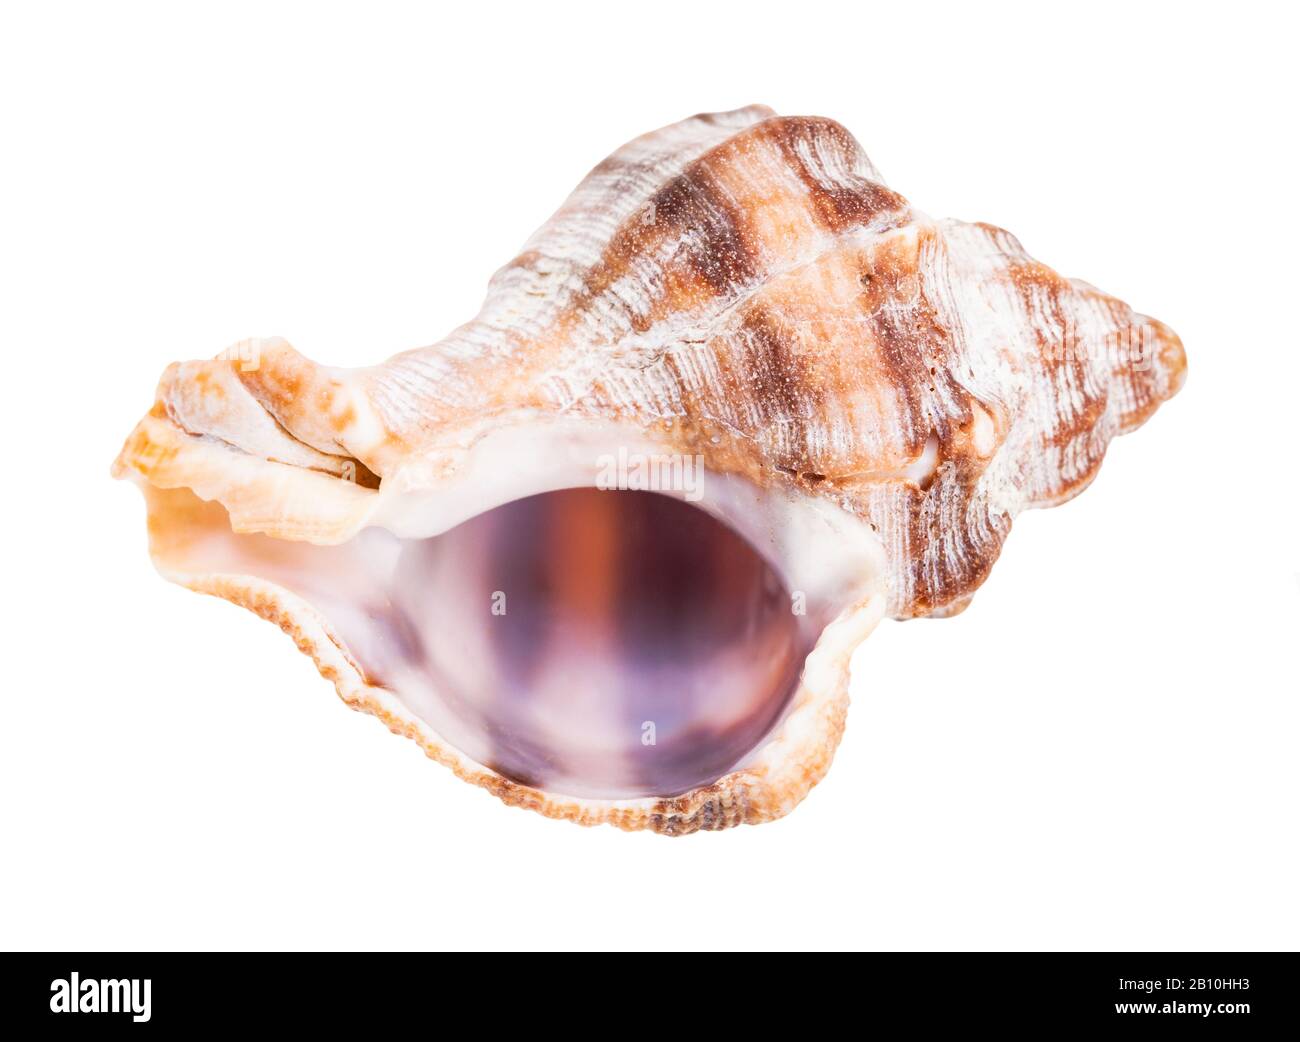 empty shell of whelk snail isolated on white background Stock Photo